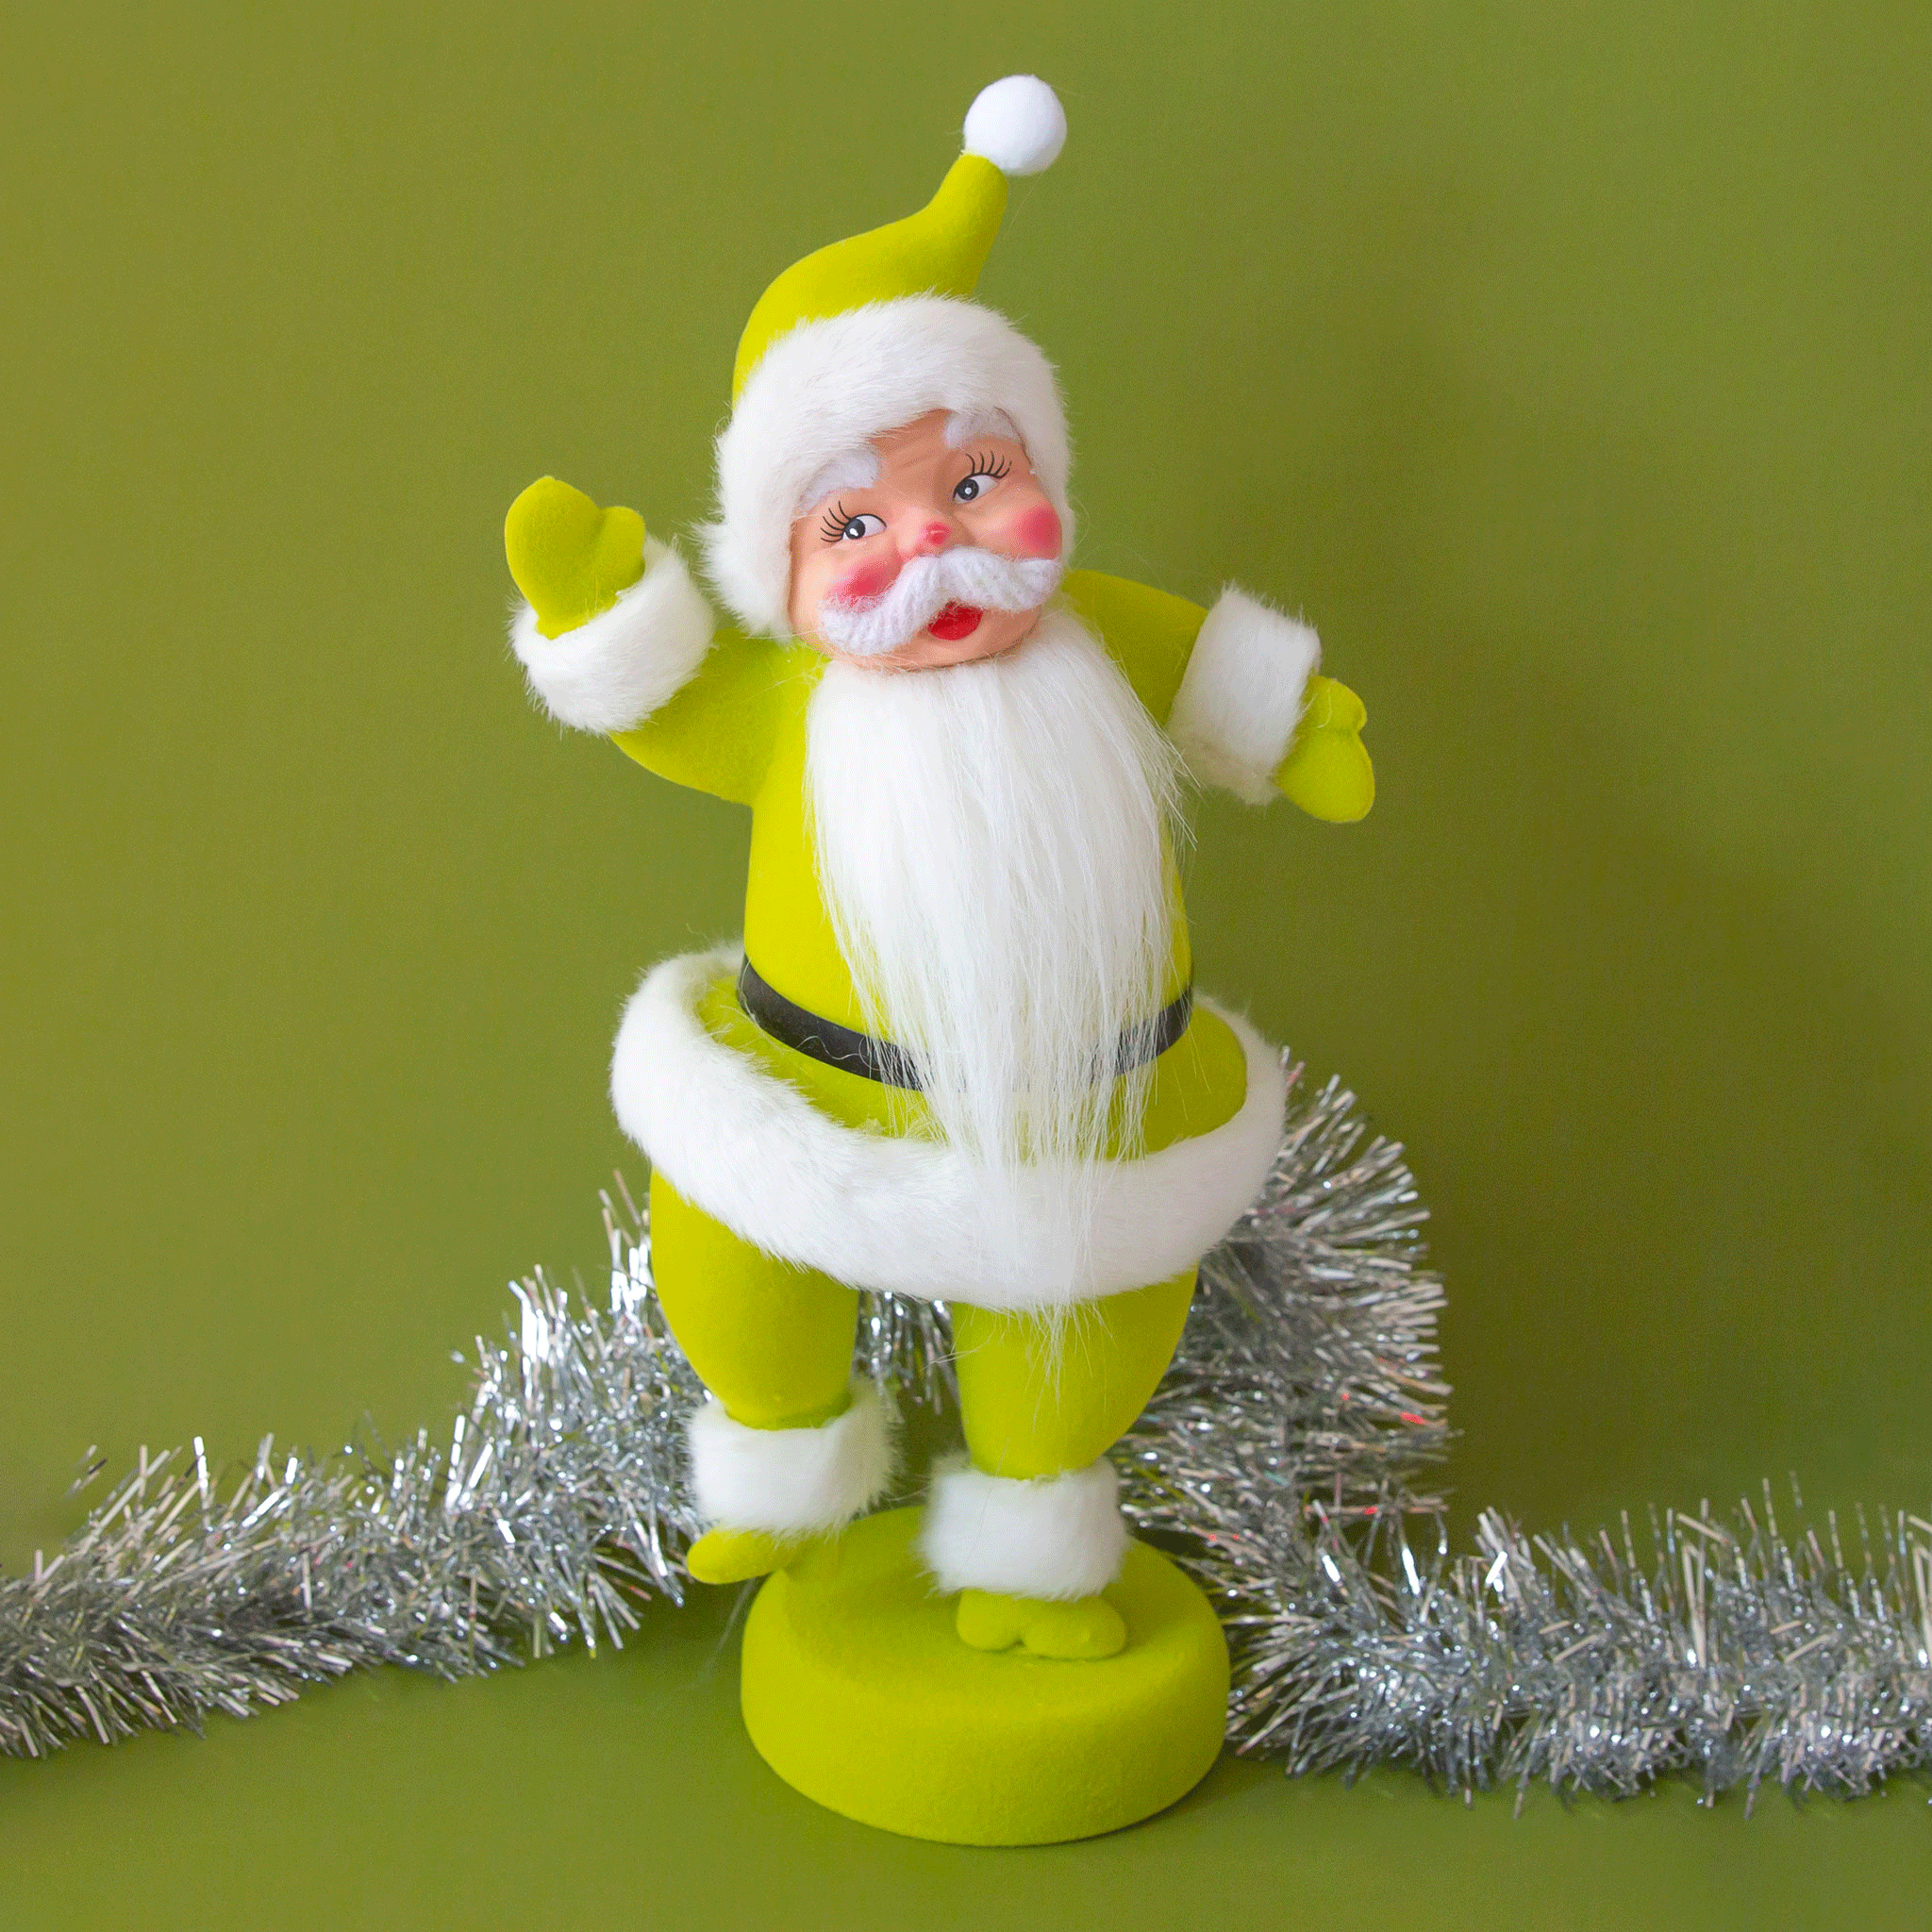 A plastic santa figurine with a chartreuse suit on with furry detailing the cuffs, jacket and hat.